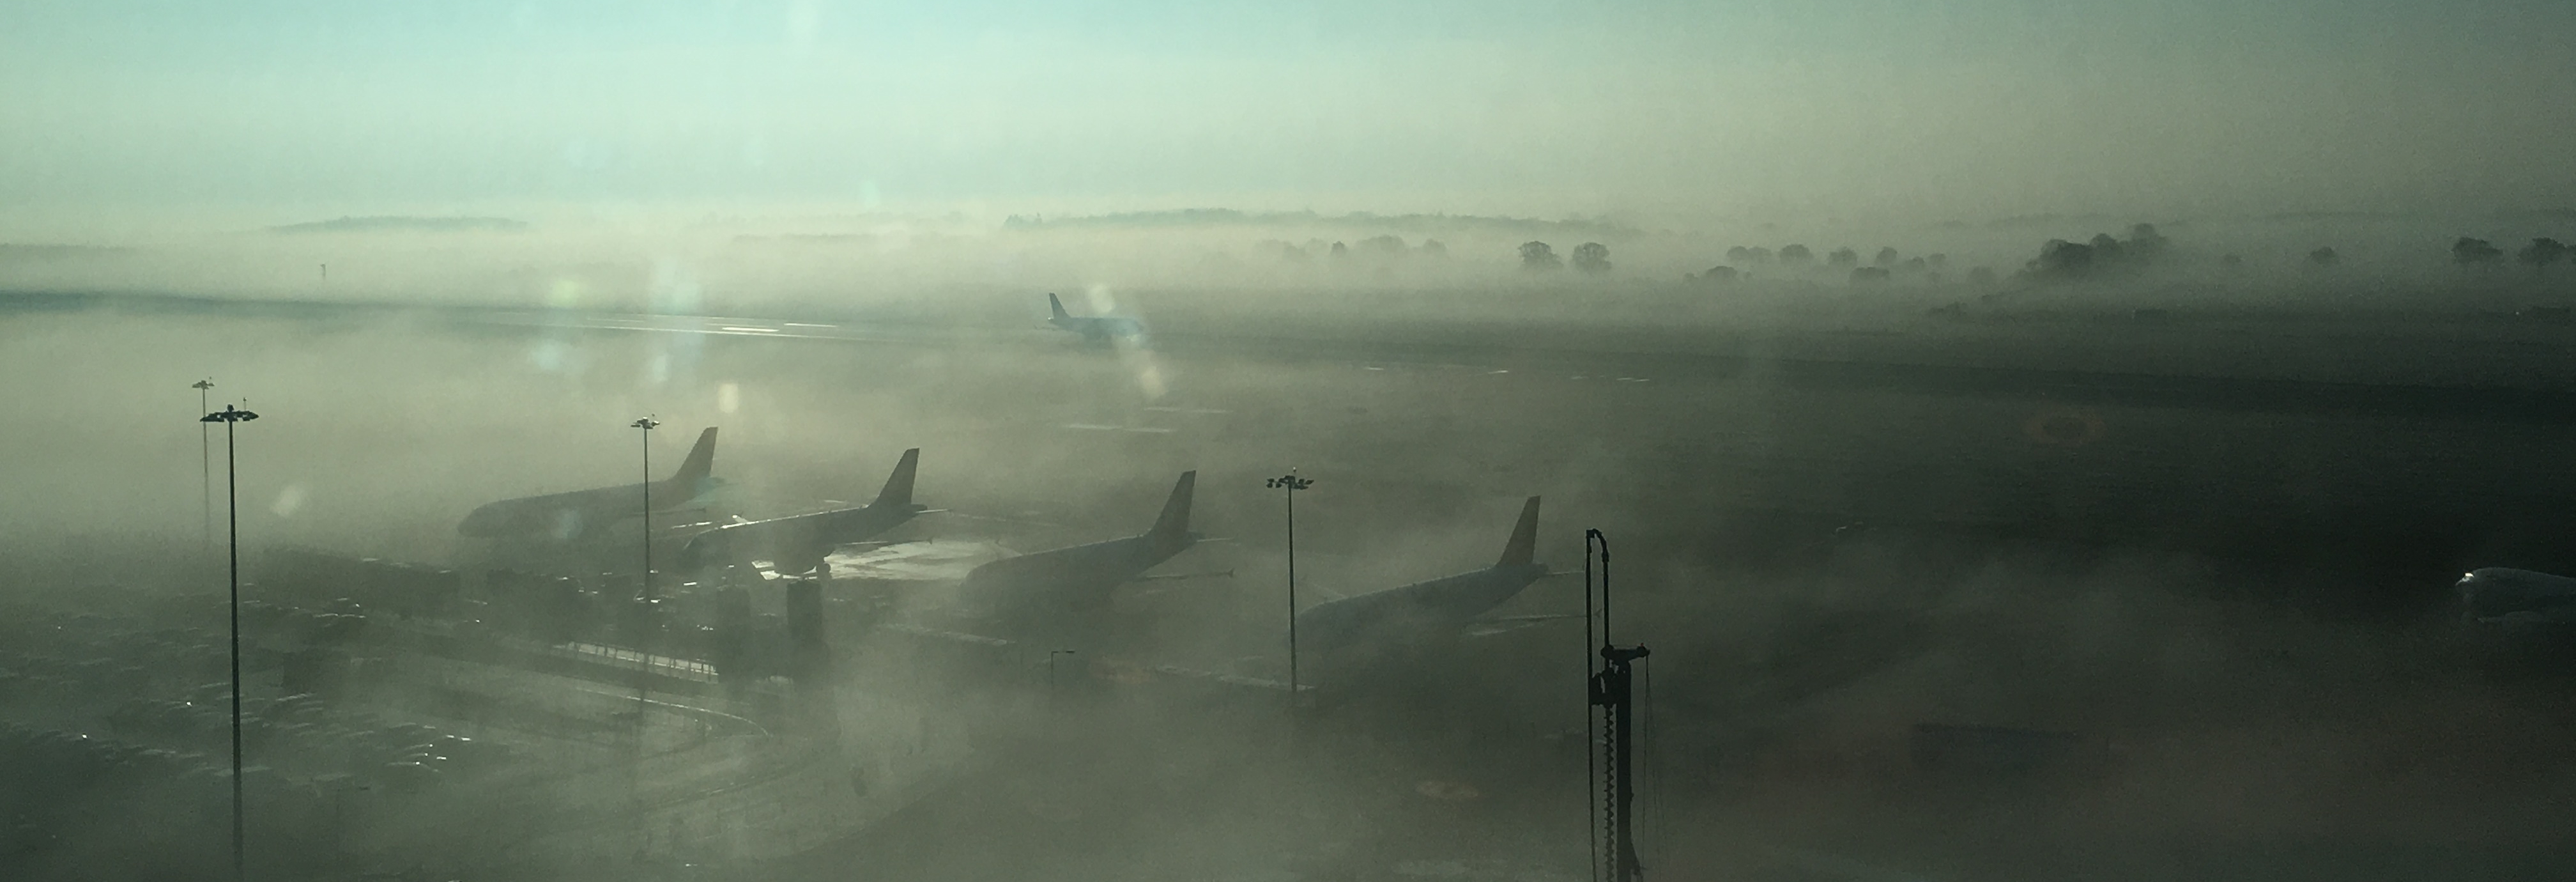 Foggy Spells: What it means for air traffic controllers - NATS Blog